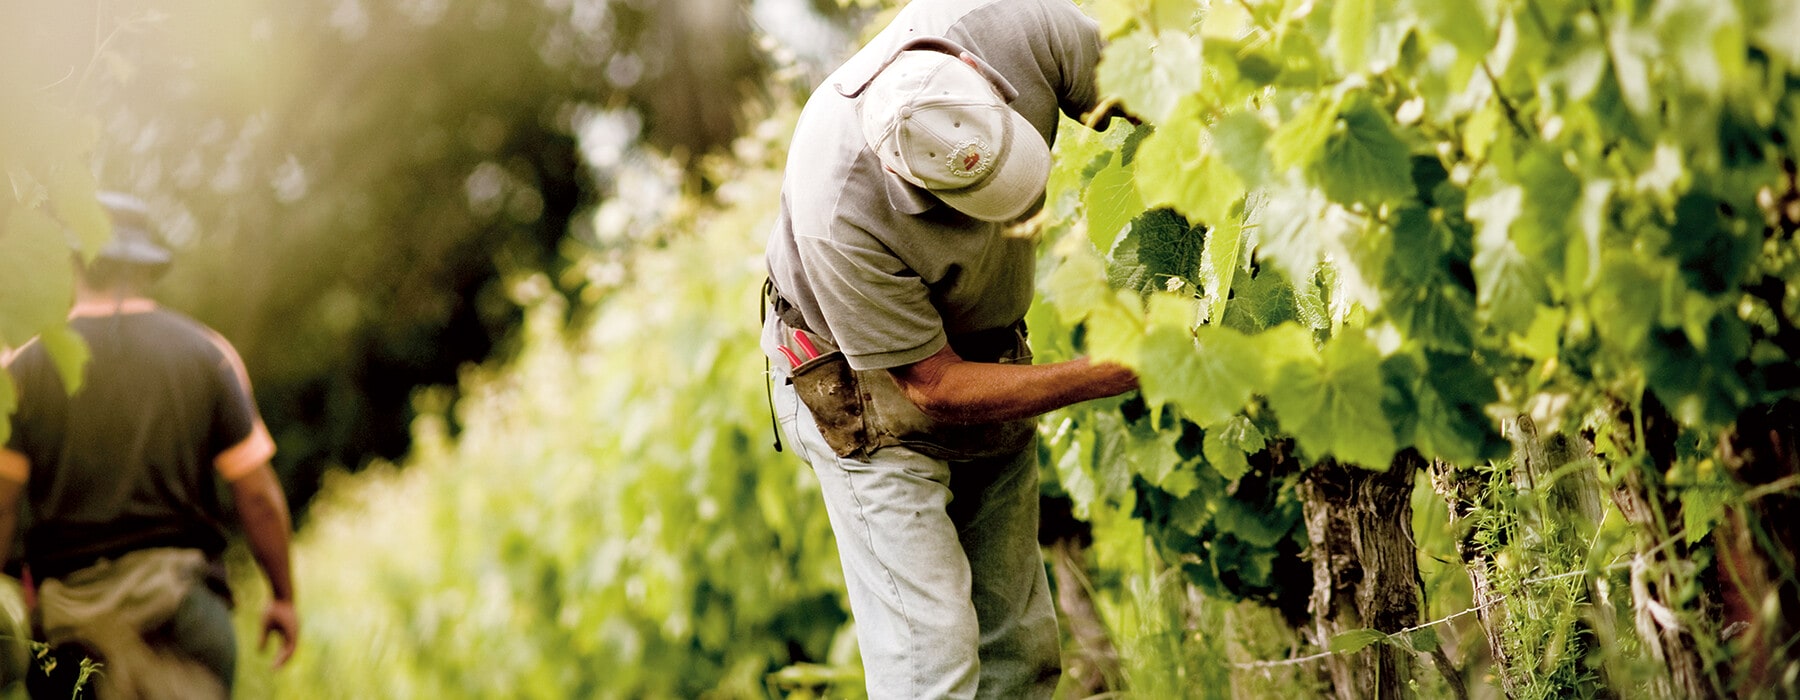 Man picking grapes from vines